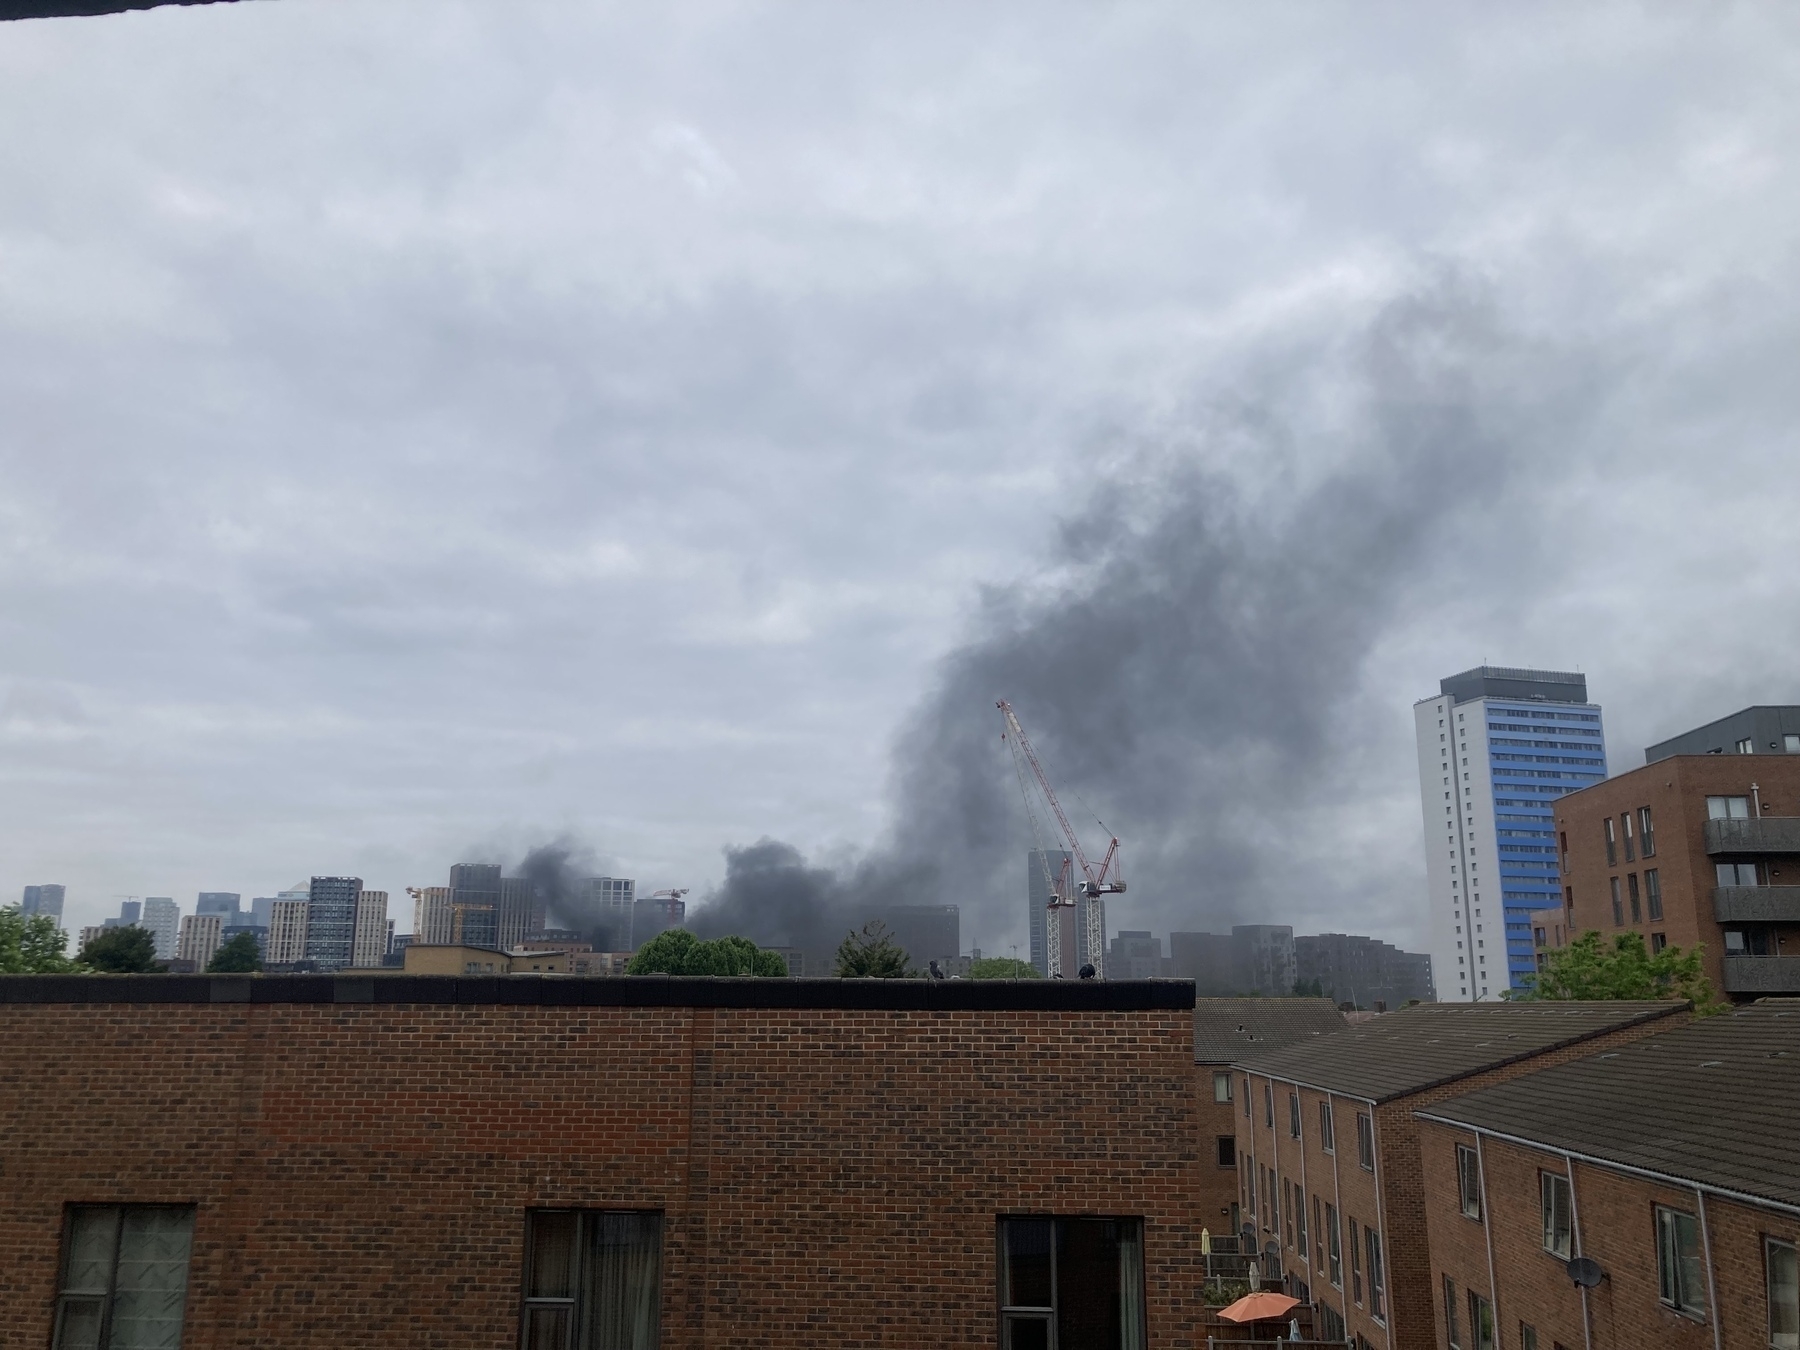 Smoke billows over the rooftops, obscuring construction and high rise buildings 